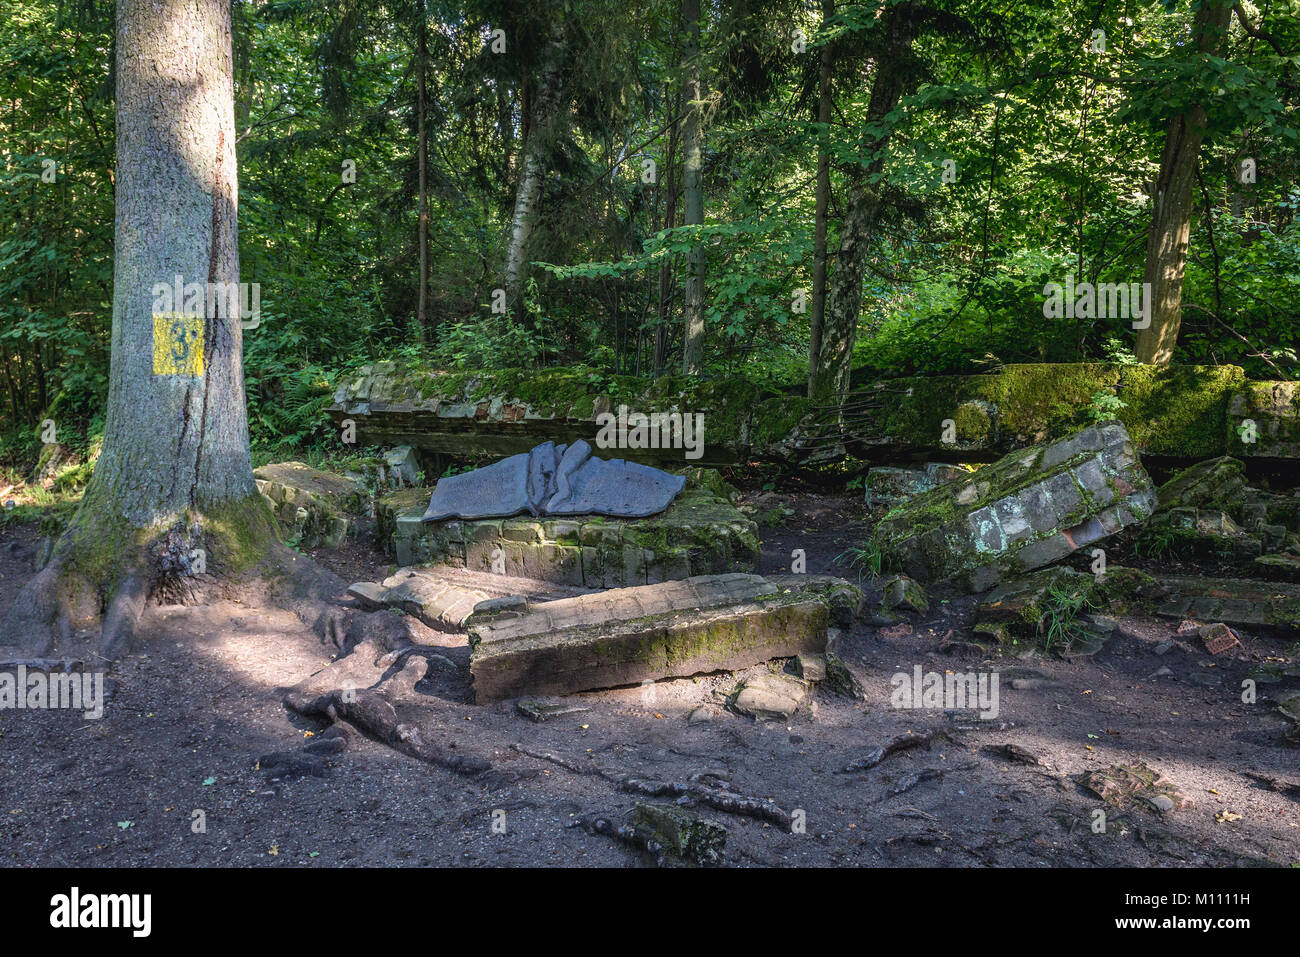 Memorial stone of 20 July plot - attempted to assassinate Adolf Hitler in Wolf's Lair - the headquarters of Adolf Hitler near Gierloz, Poland Stock Photo